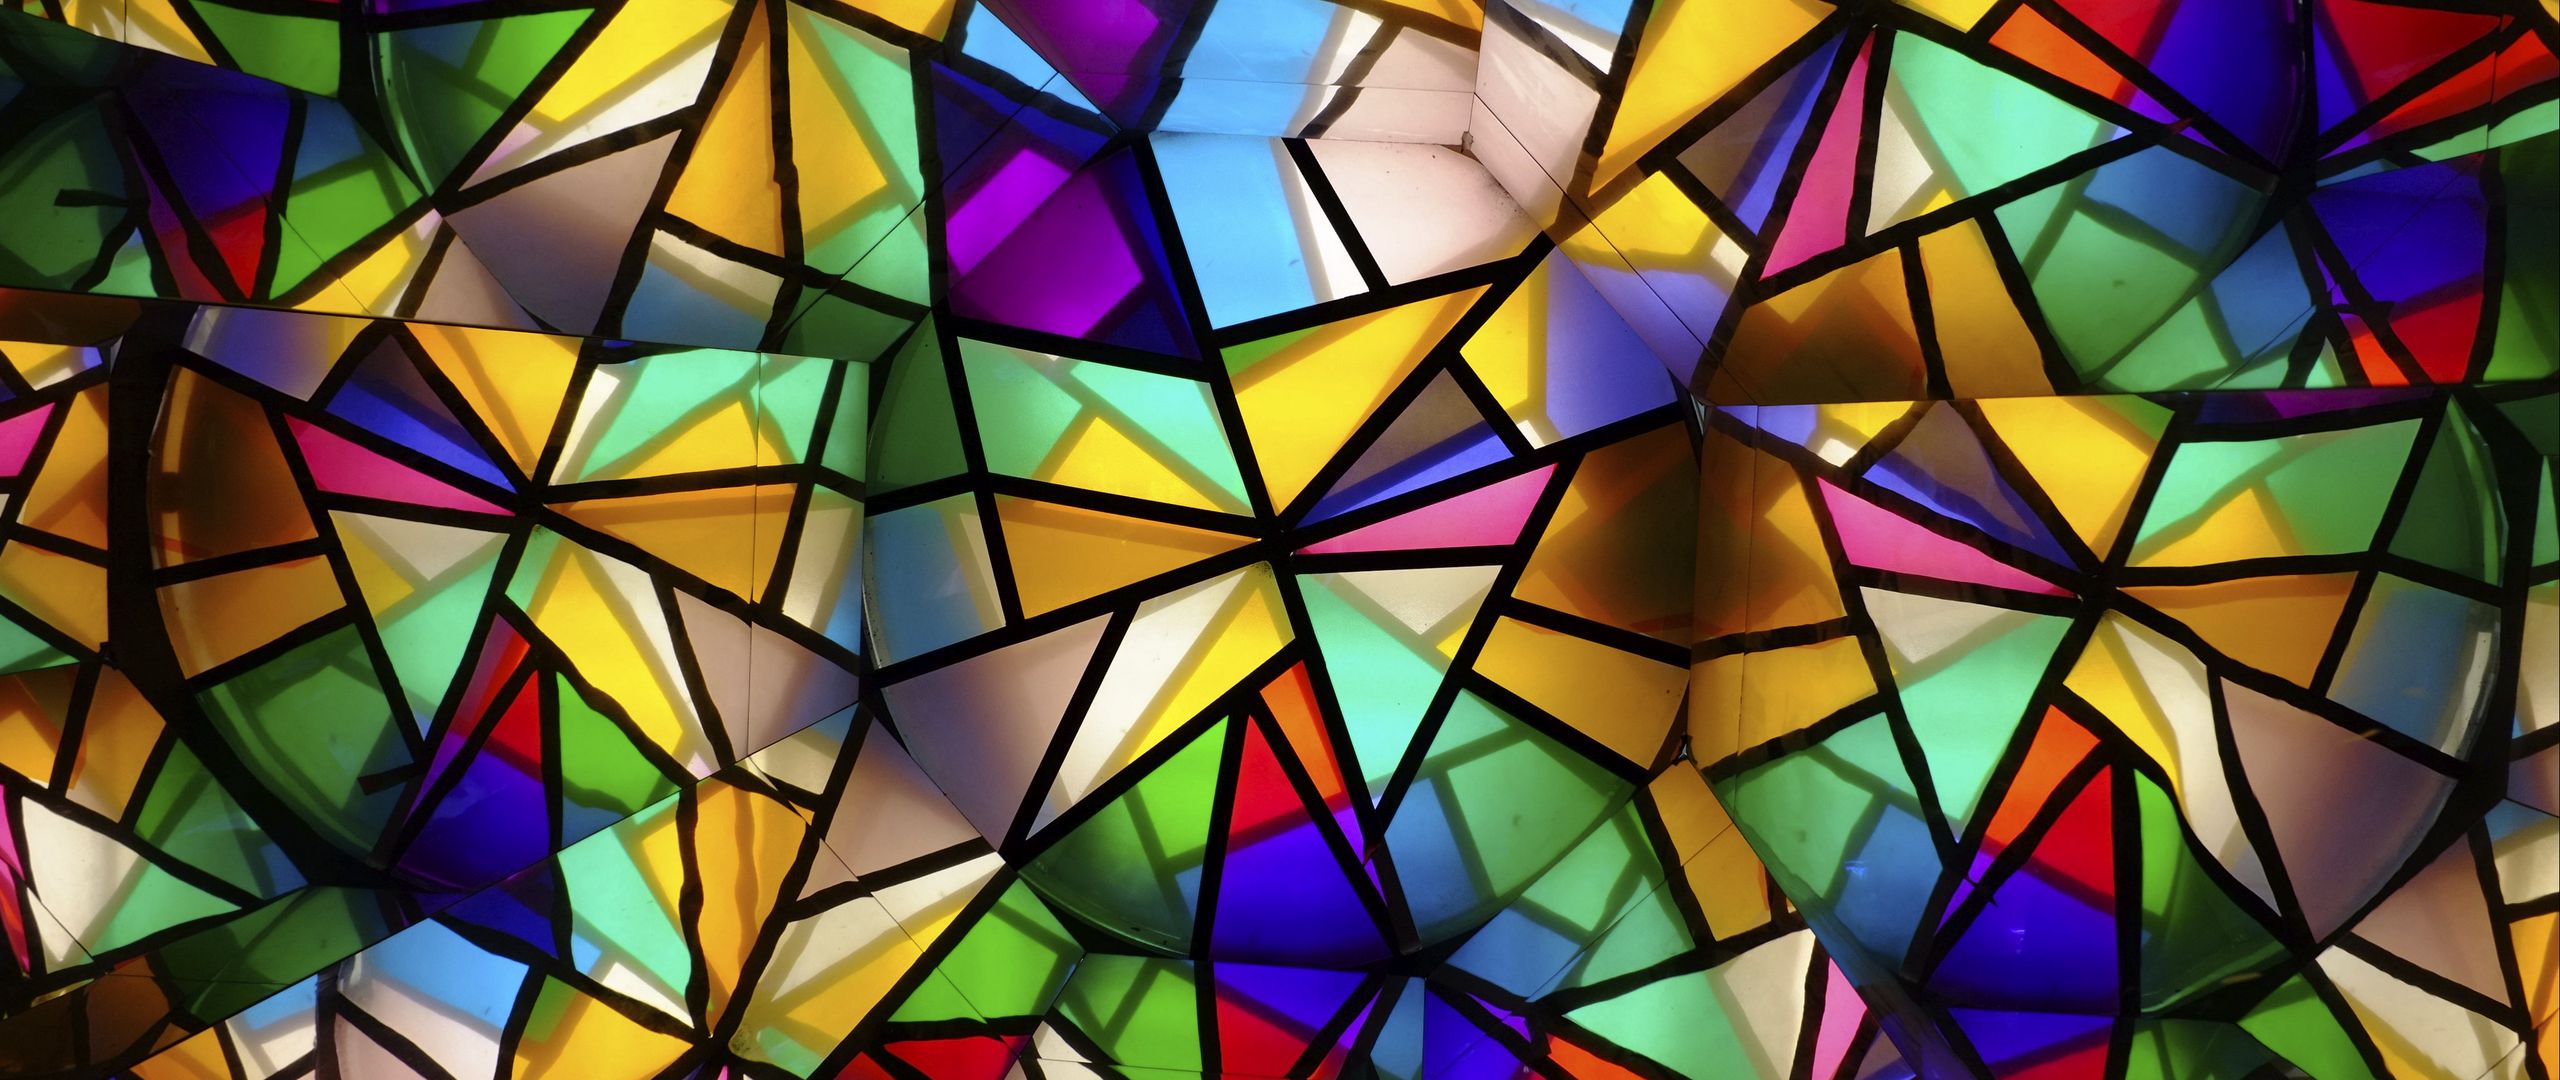 Download wallpaper 2560x1080 stained glass, colorful, glass fragments dual  wide 1080p hd background